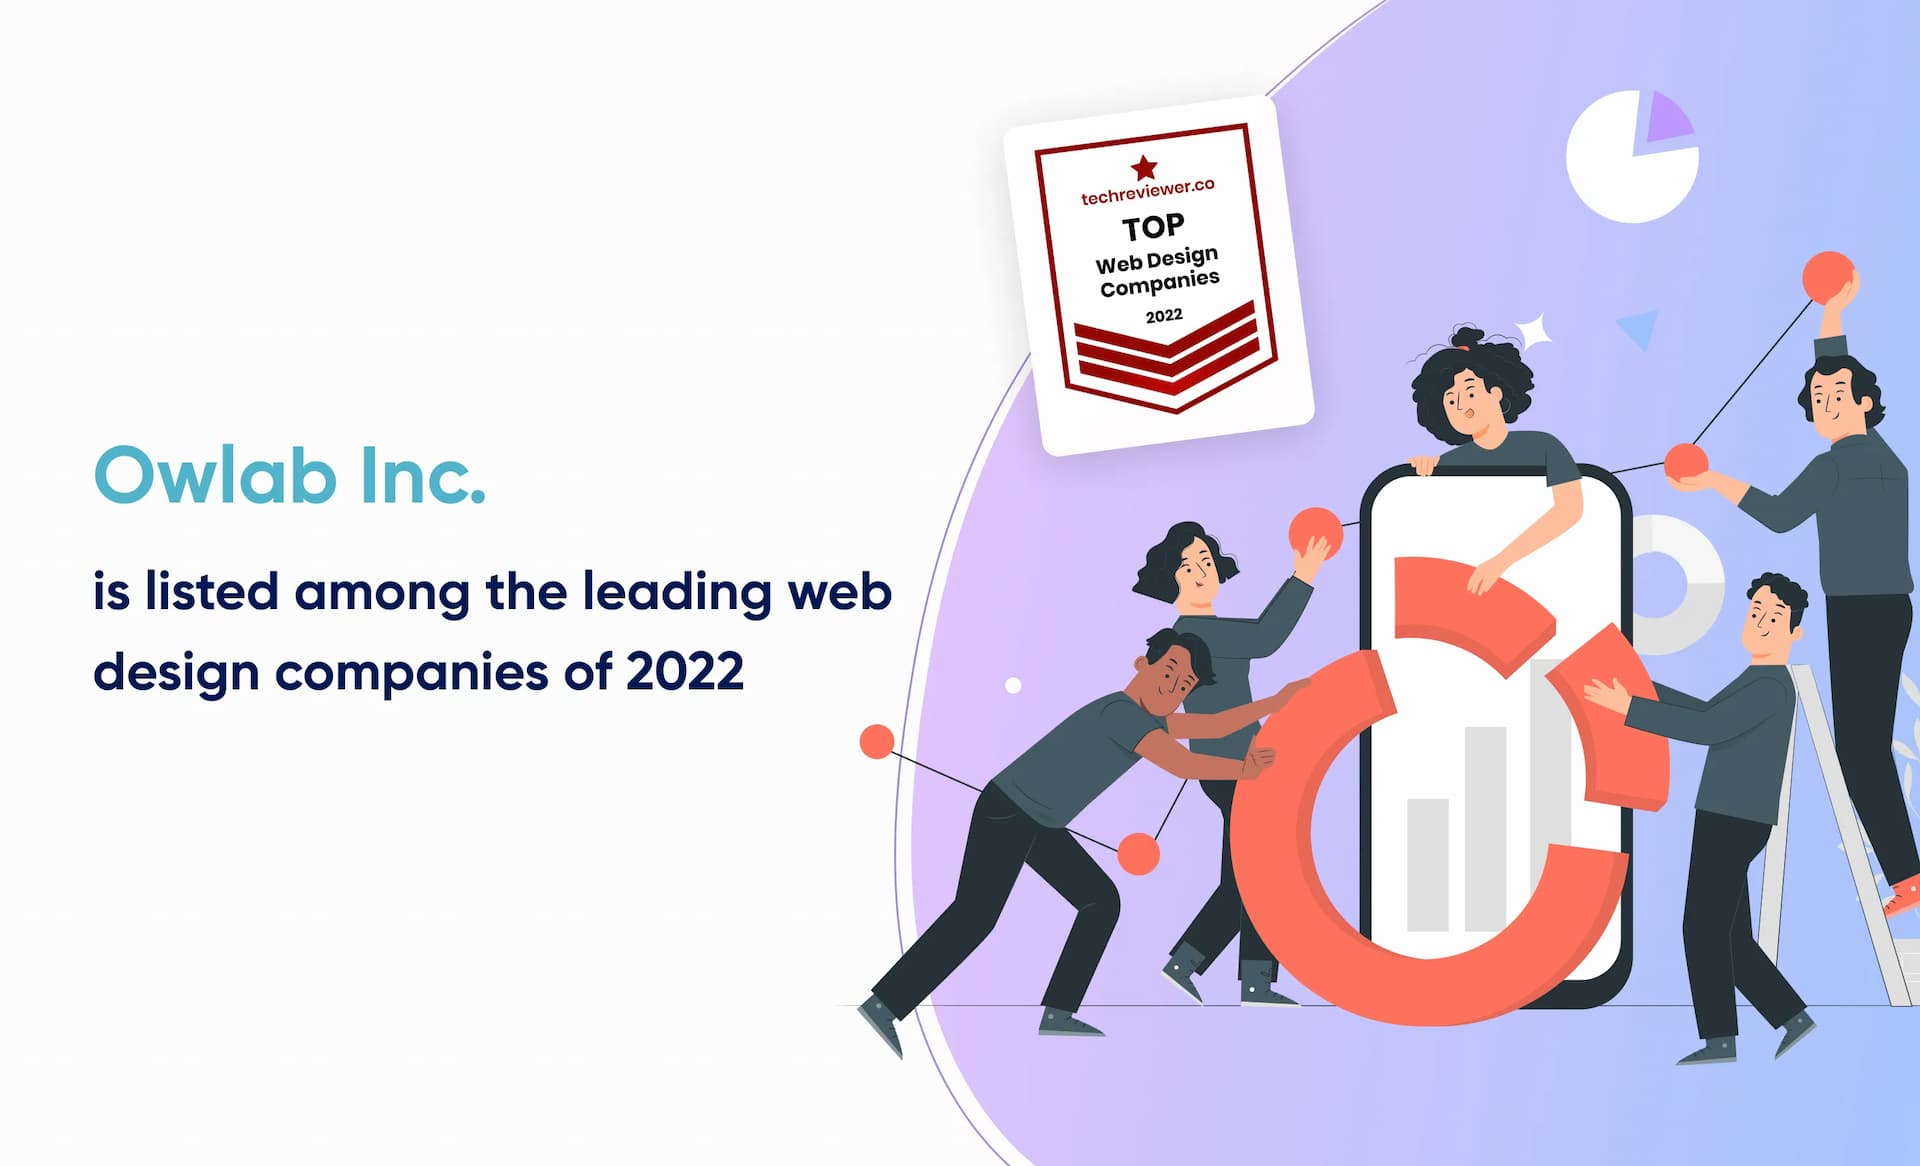 Owlab is listed among the leading web design companies of 2022